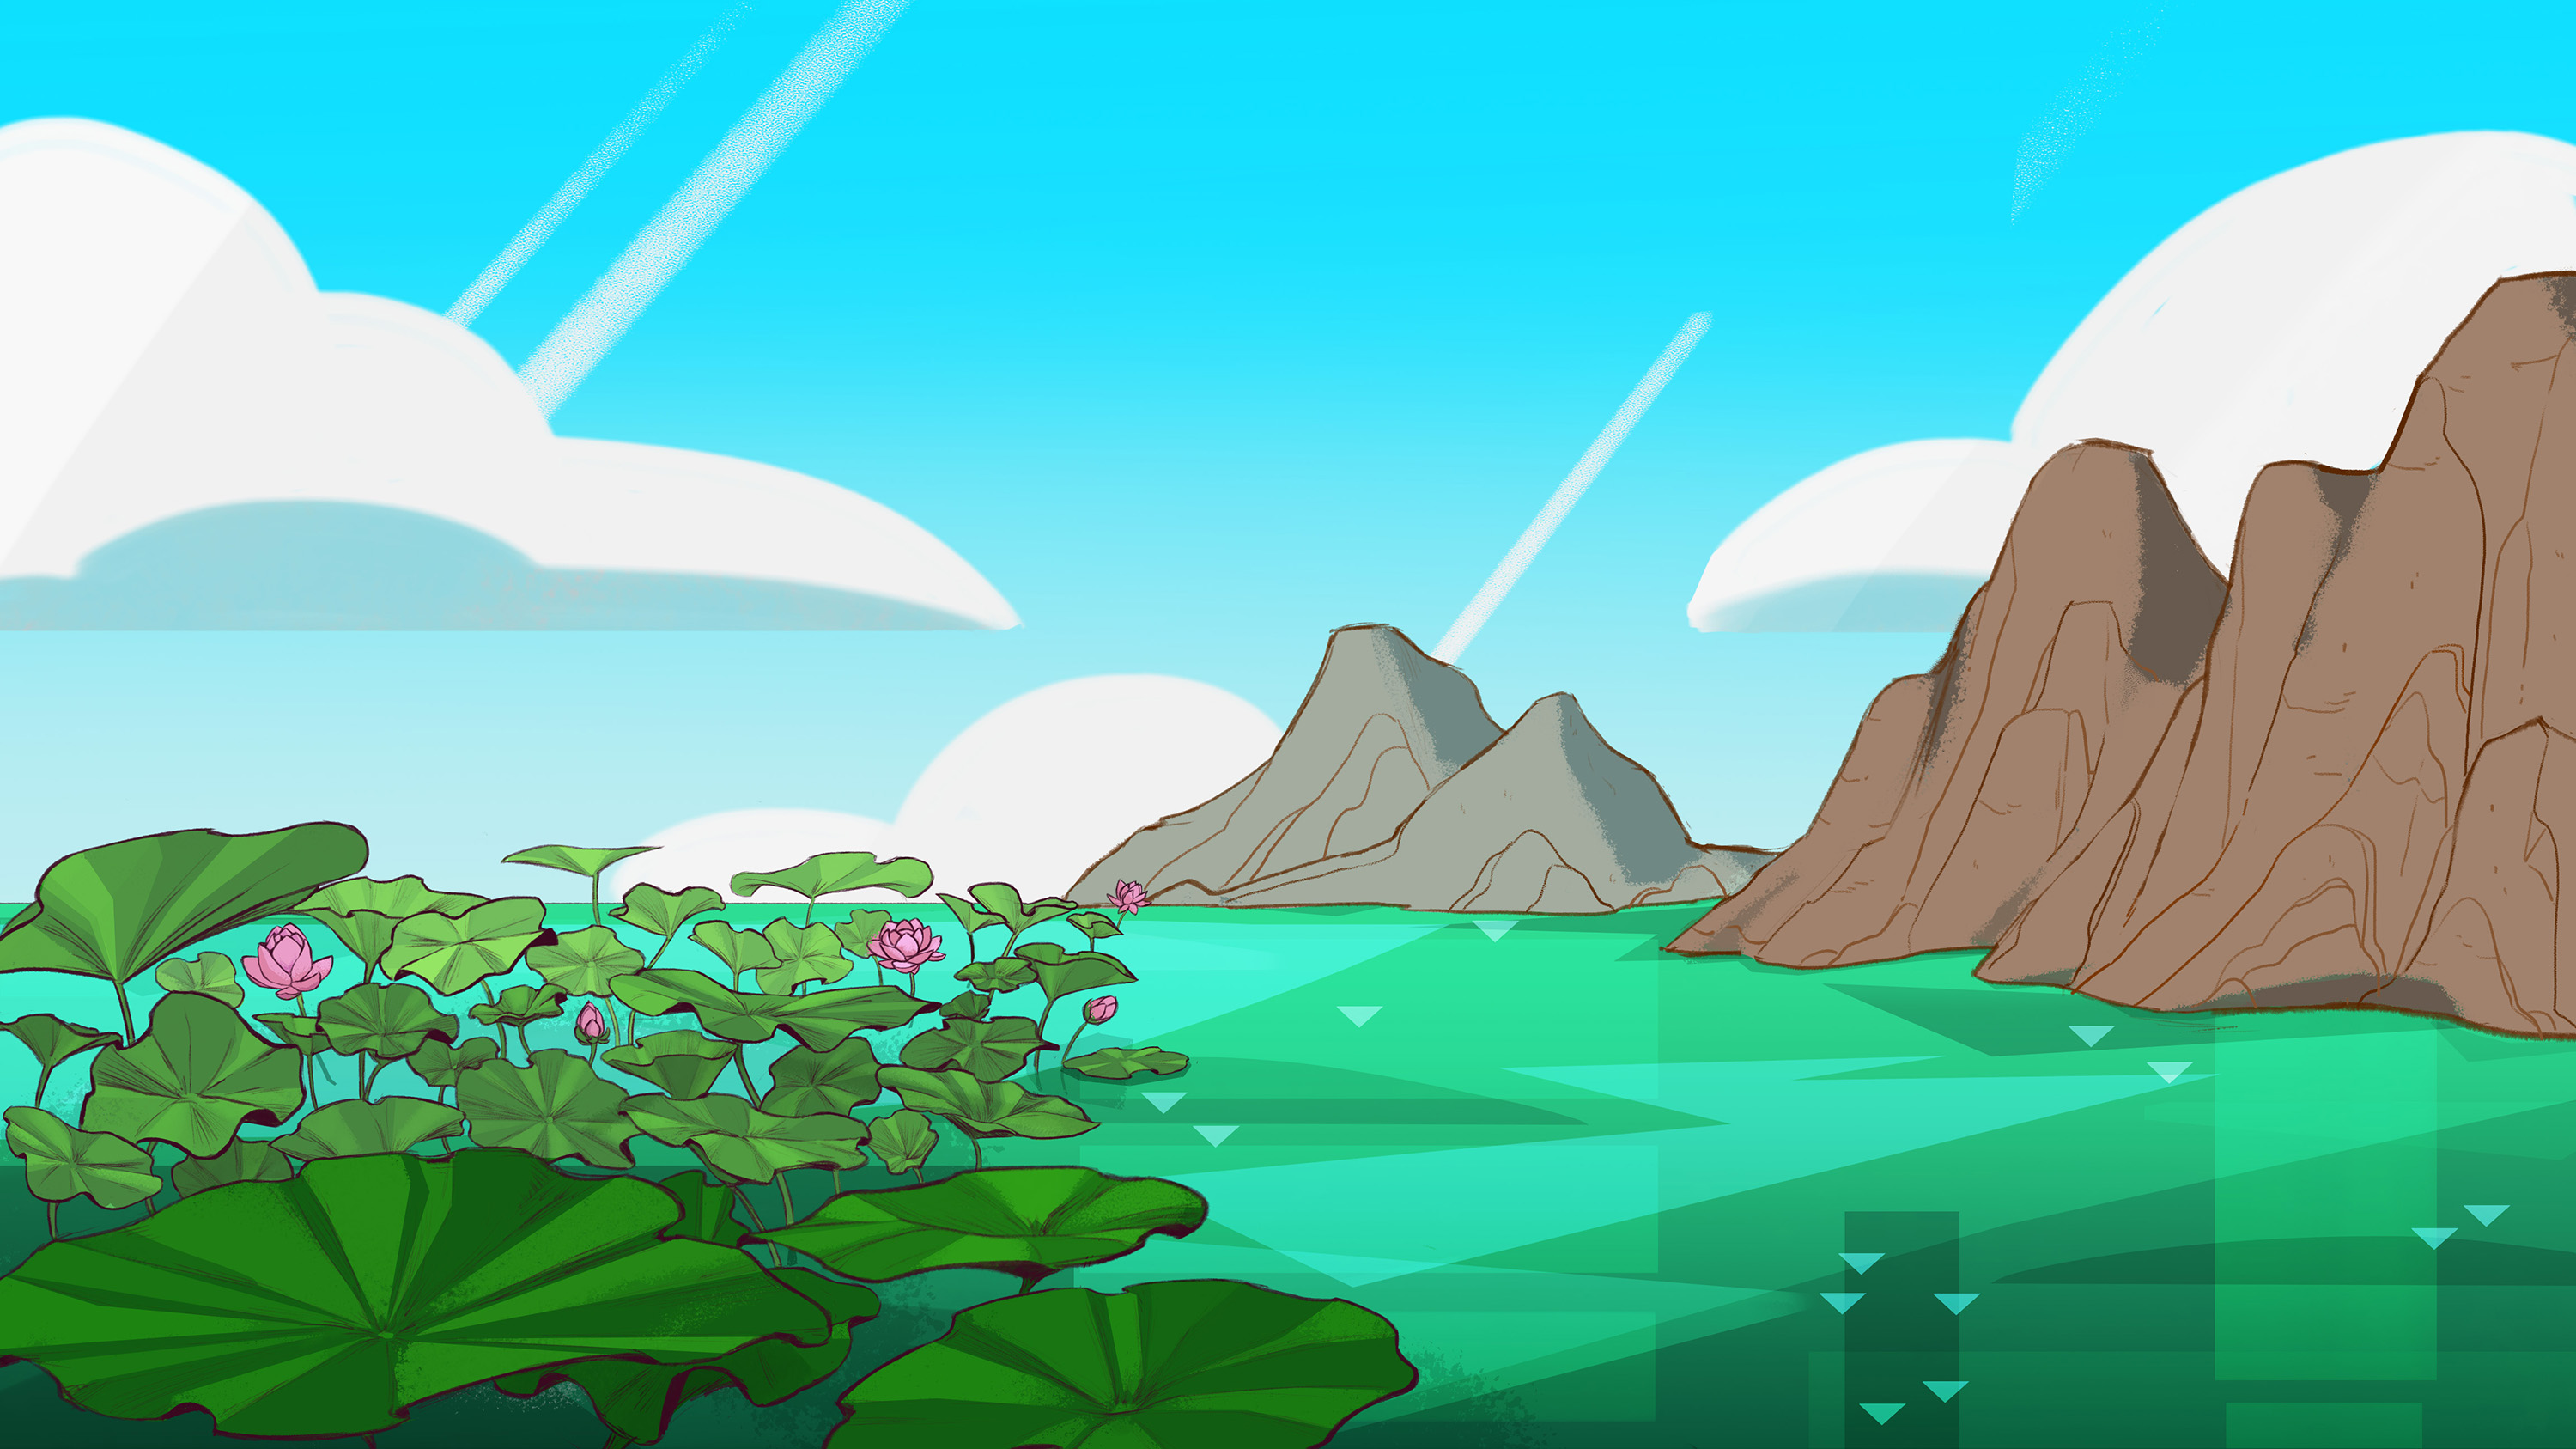  / Environmental background of a lotus pond, based on the style of Rebecca Sugar's Steven Universe. Photoshop